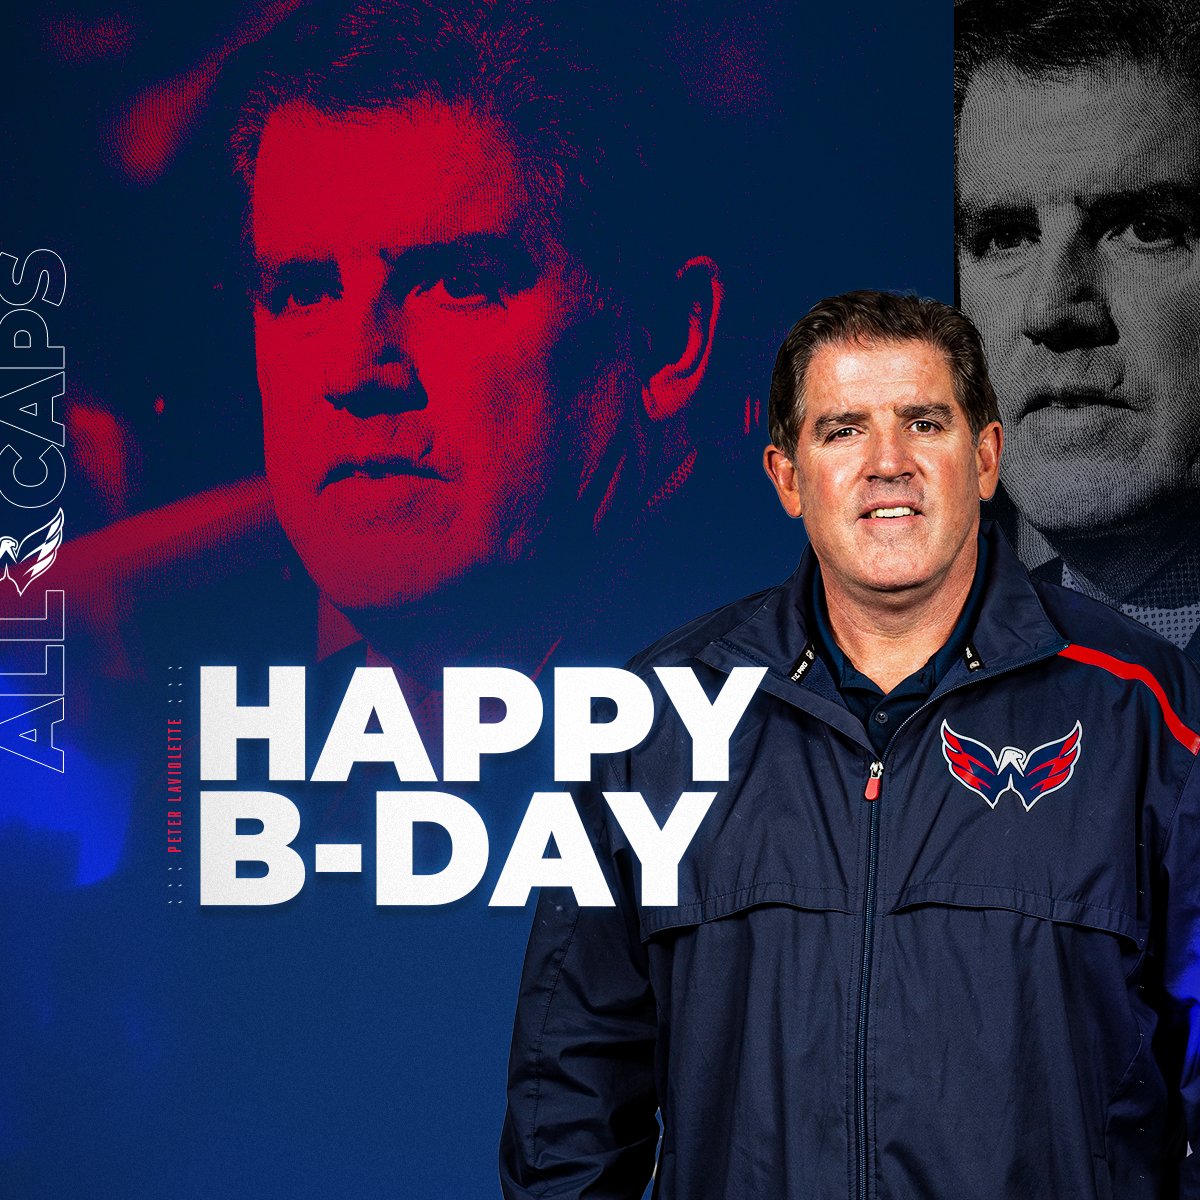 Wishing head coach Peter Laviolette a very Happy Birthday! 